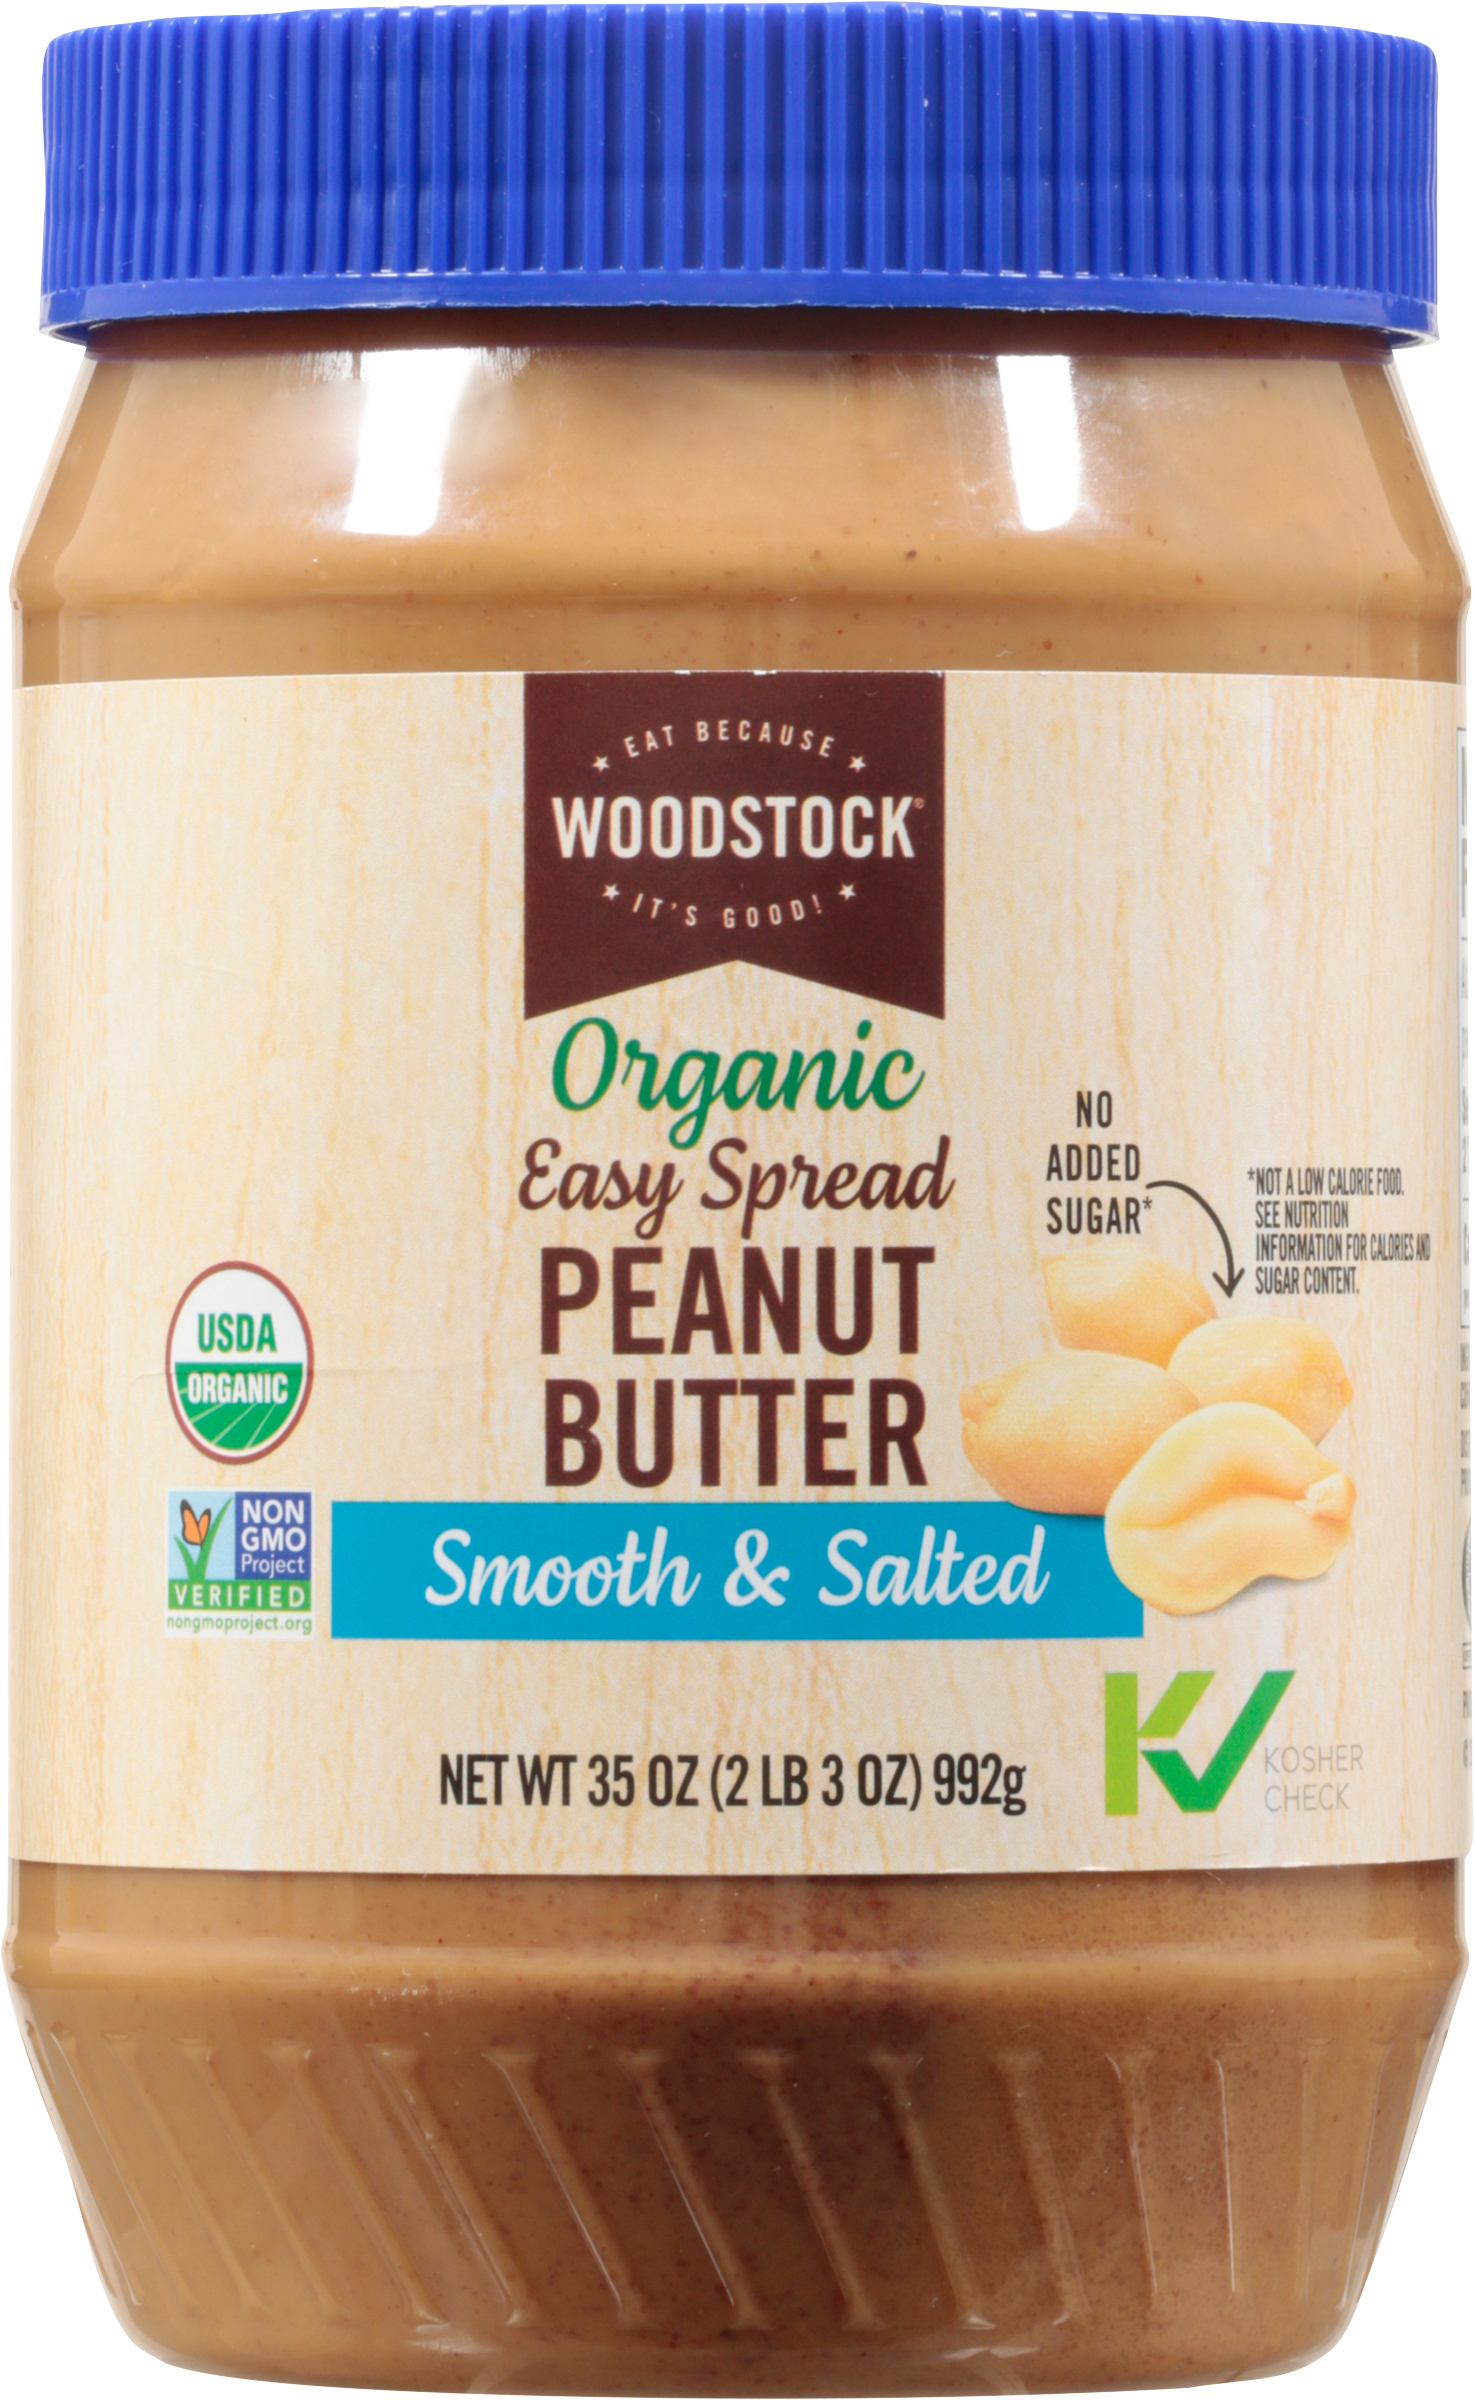 Peanut Butter, Organic, Easy Spread, Smooth & Salted